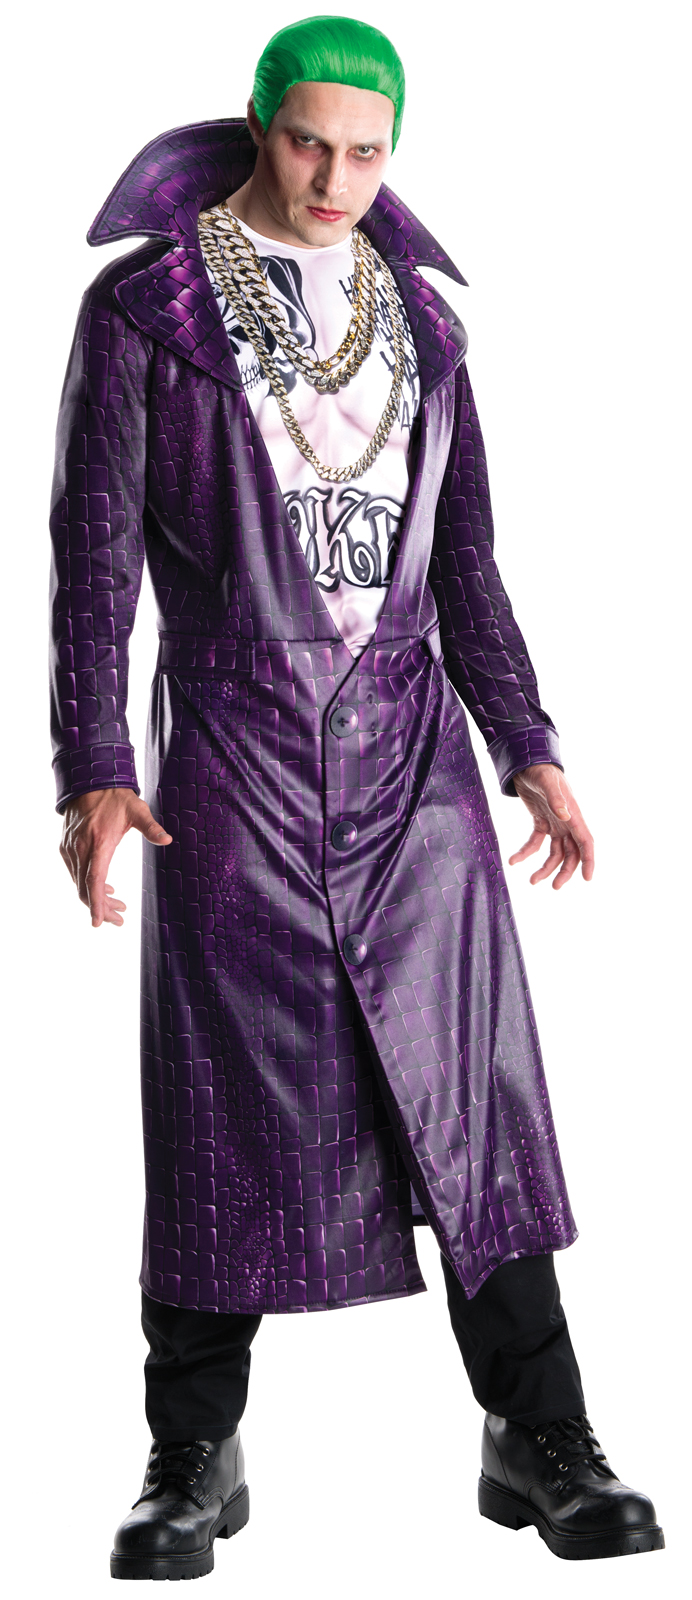 Suicide Squad: Joker Deluxe Adult Costume - PartyBell.com